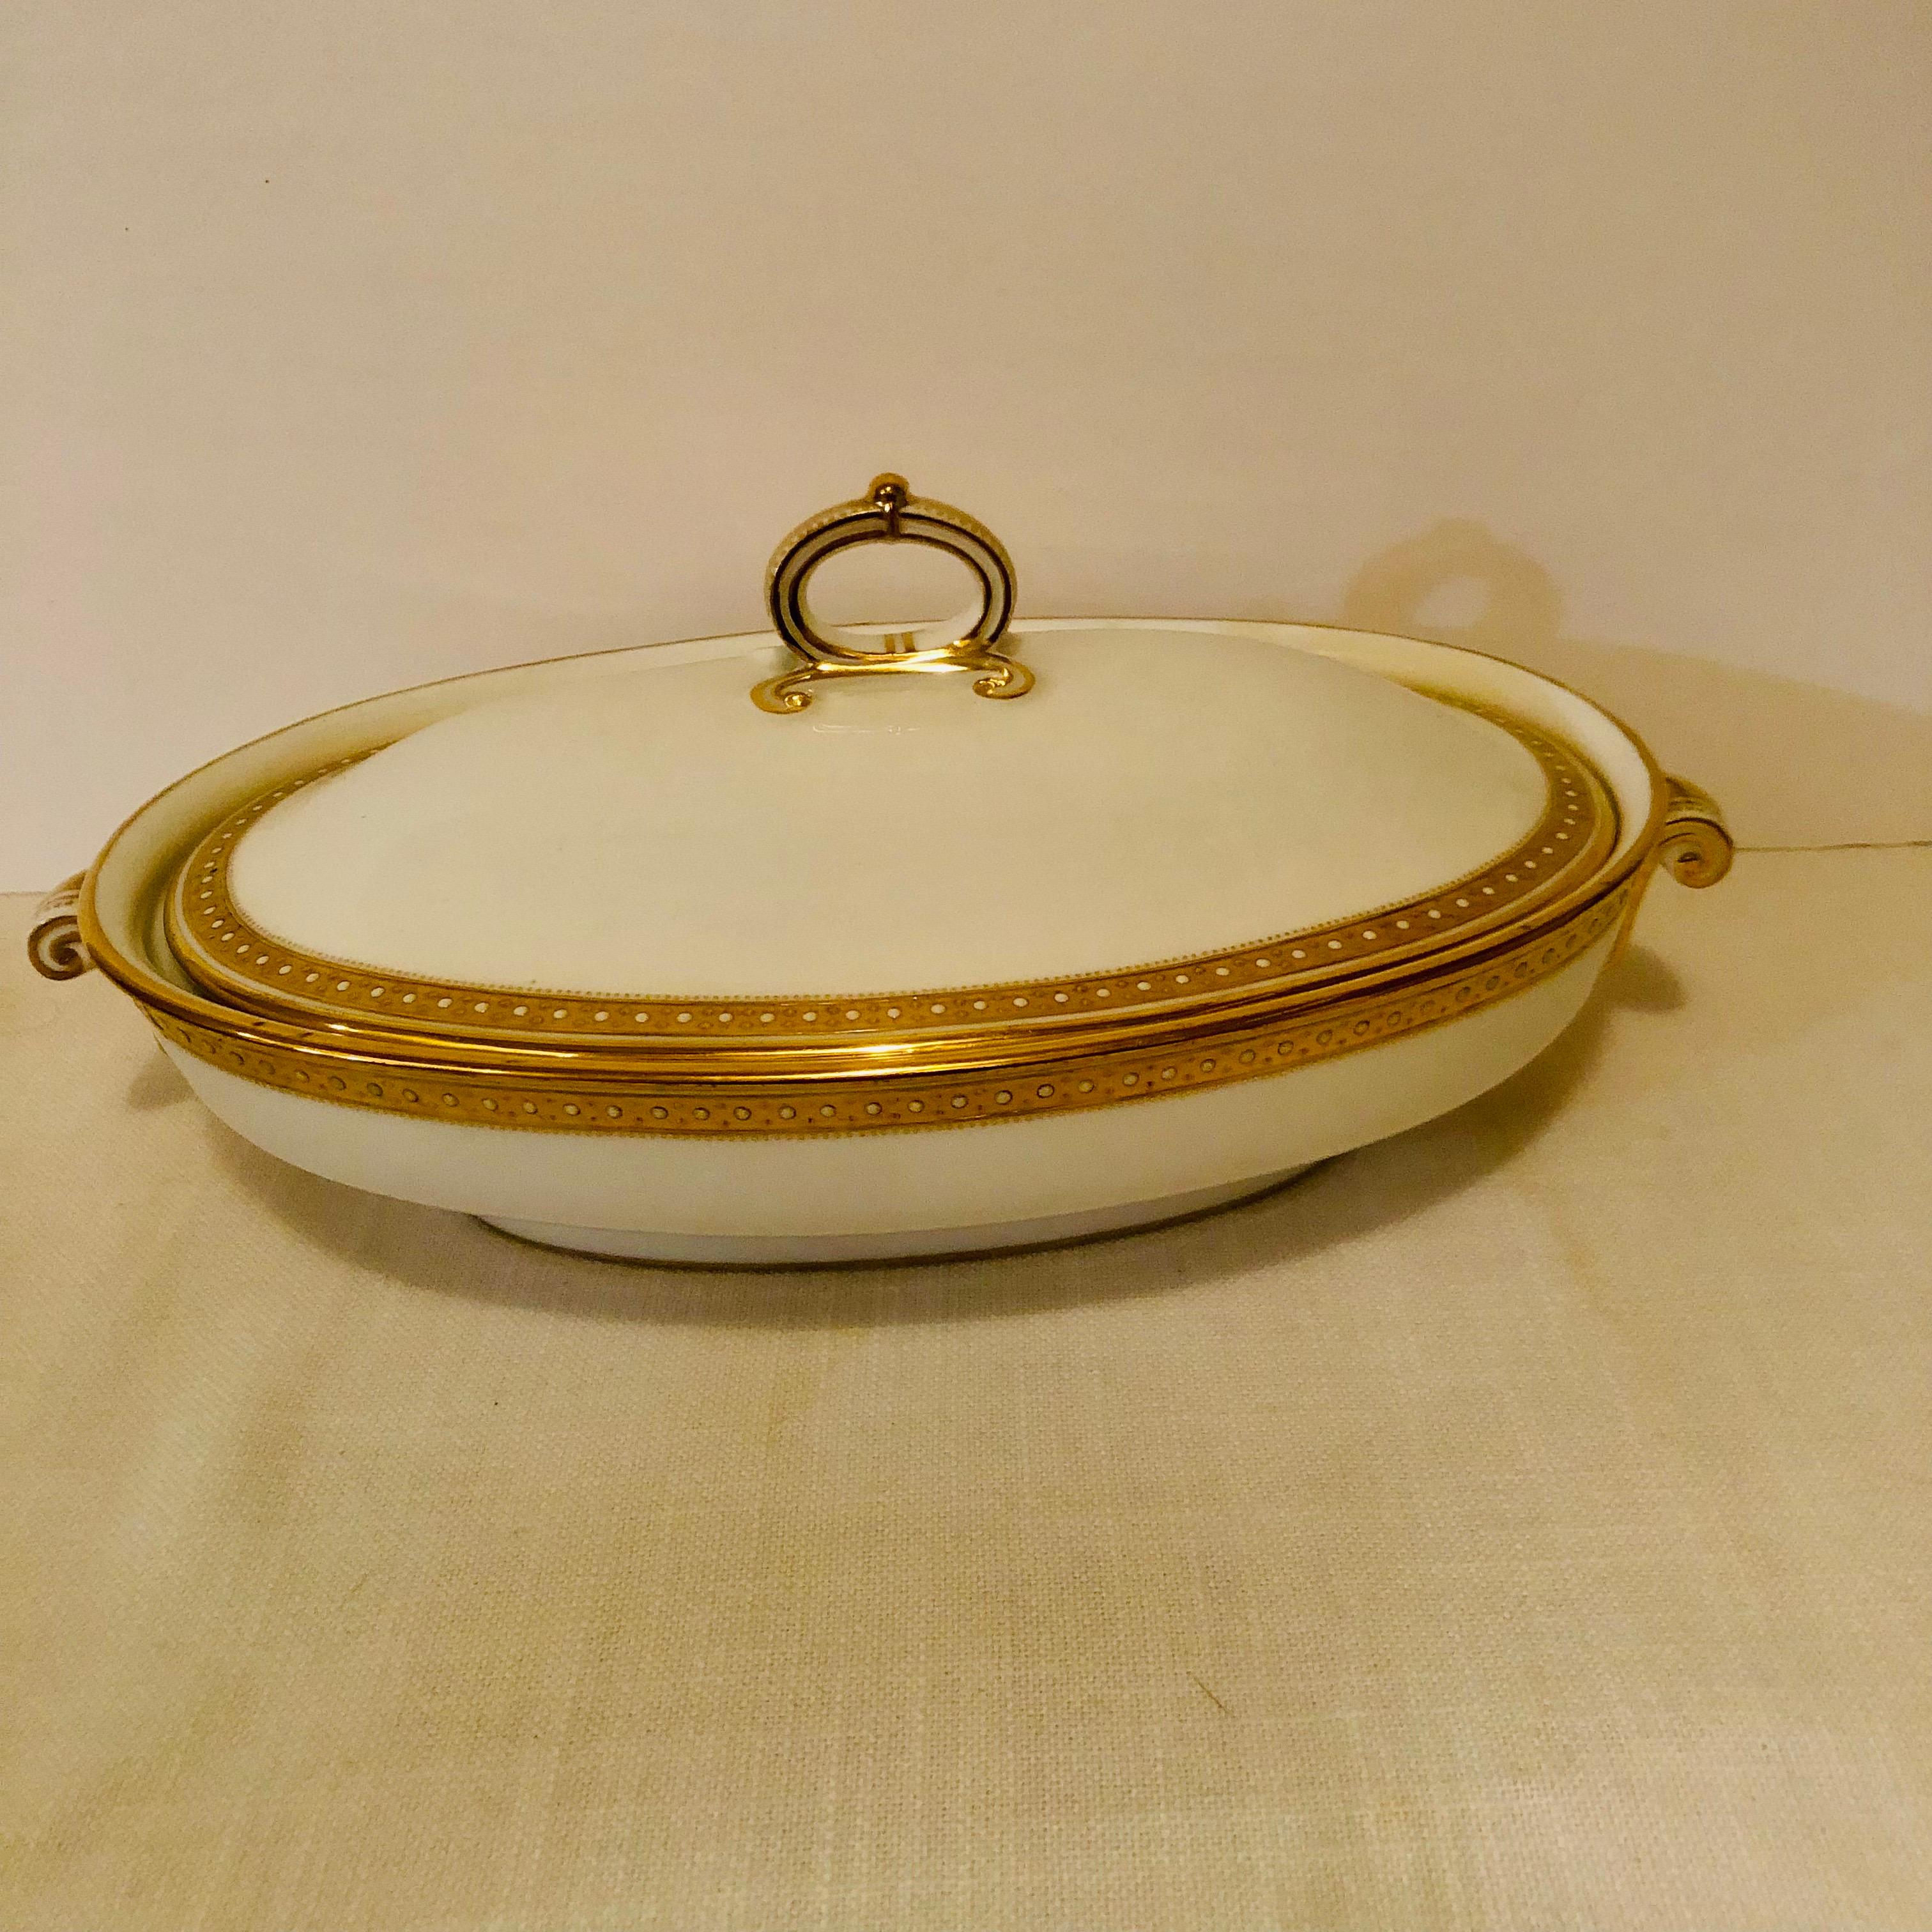 This is a lovely Copeland Spode covered vegetable with a gold border and white enamel jeweling on a white porcelain ground. This covered vegetable definitely looks like simple elegance, and it would look beautiful with any dinnerware you already